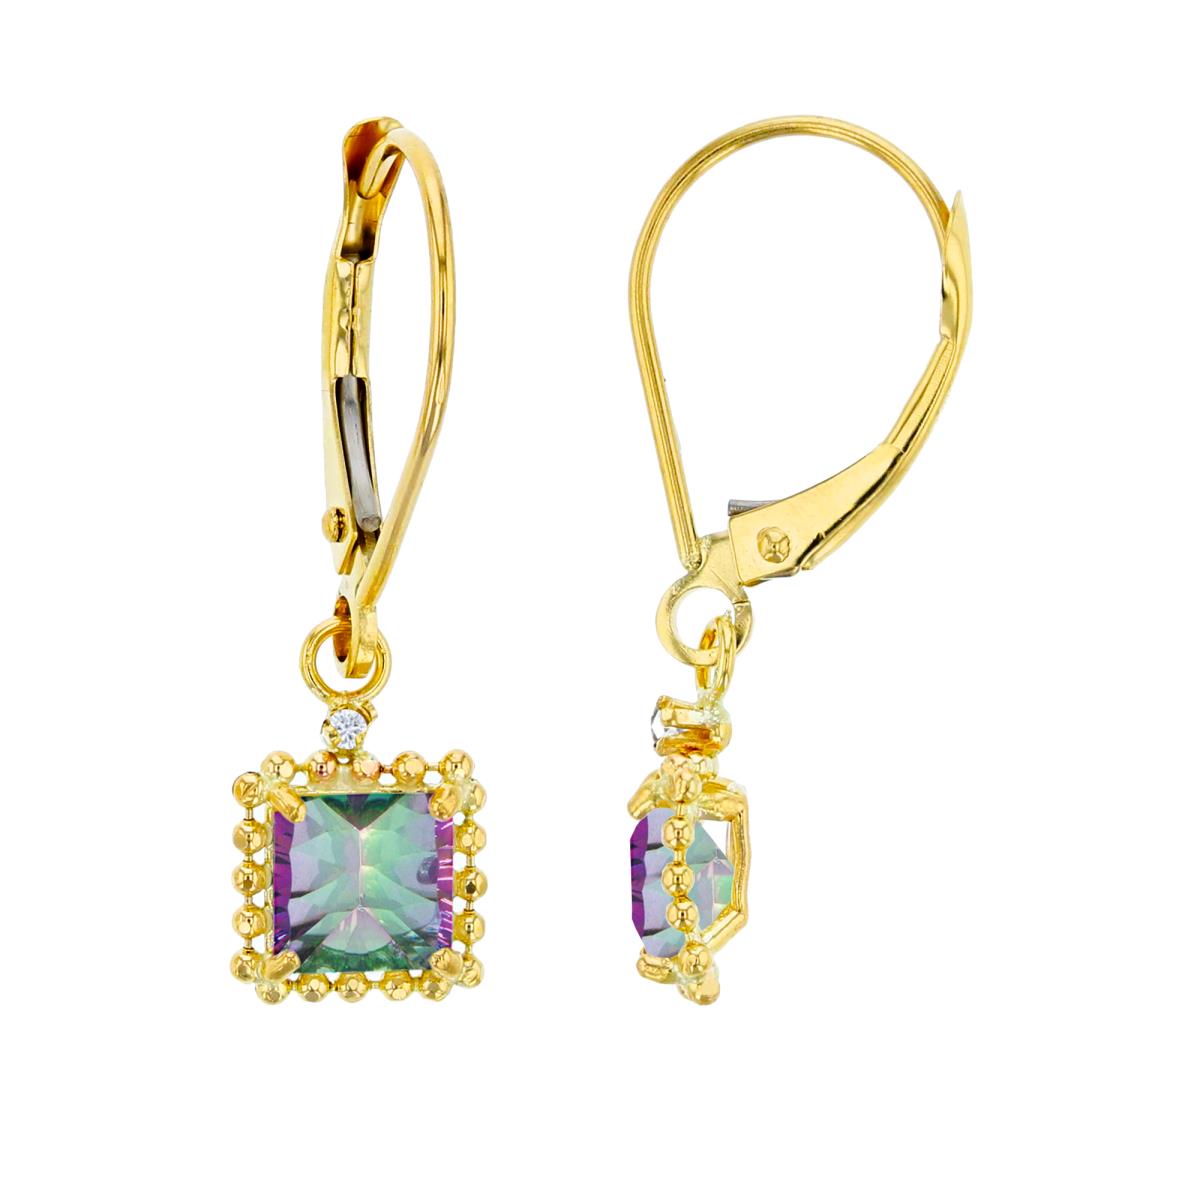 10K Yellow Gold 1.25mm Rd Created White Sapphire & 5mm Sq Mystic Green Topaz Bead Frame Drop Lever-Back Earring